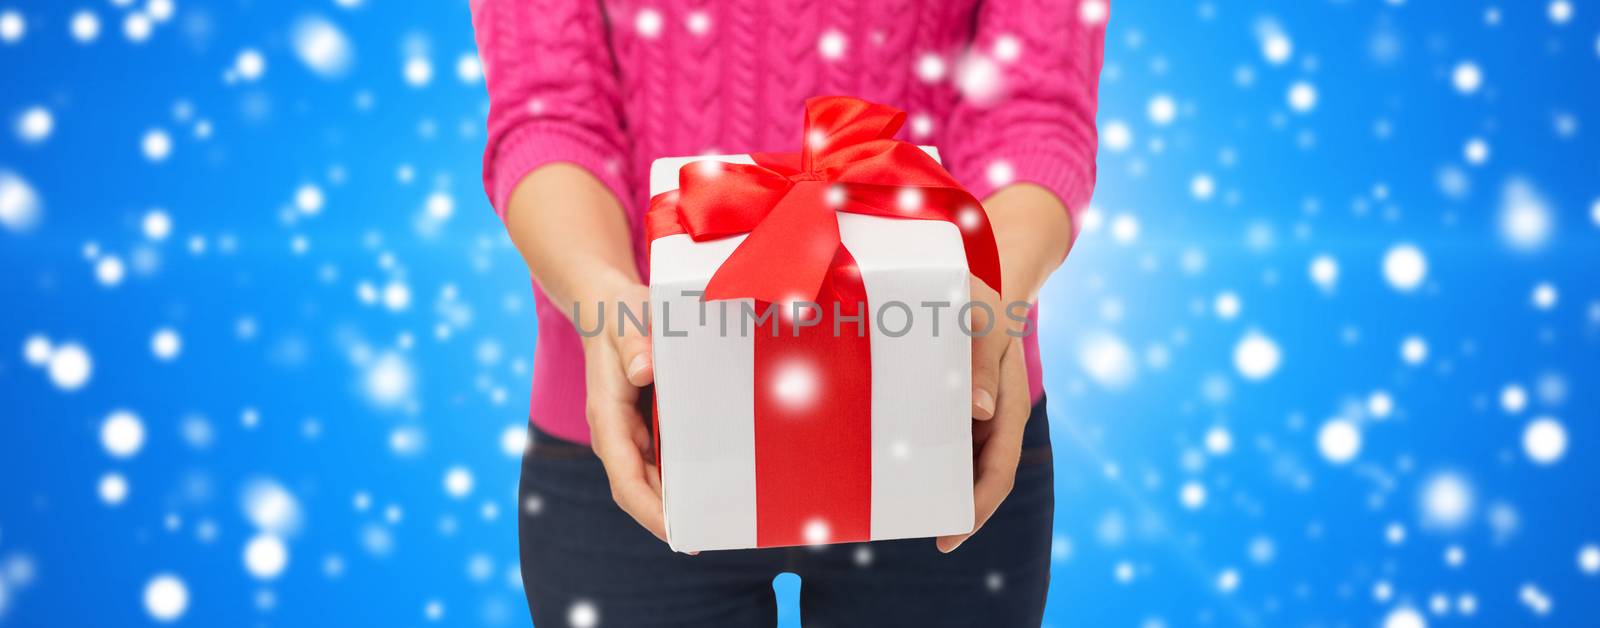 close up of woman in pink sweater holding gift box by dolgachov